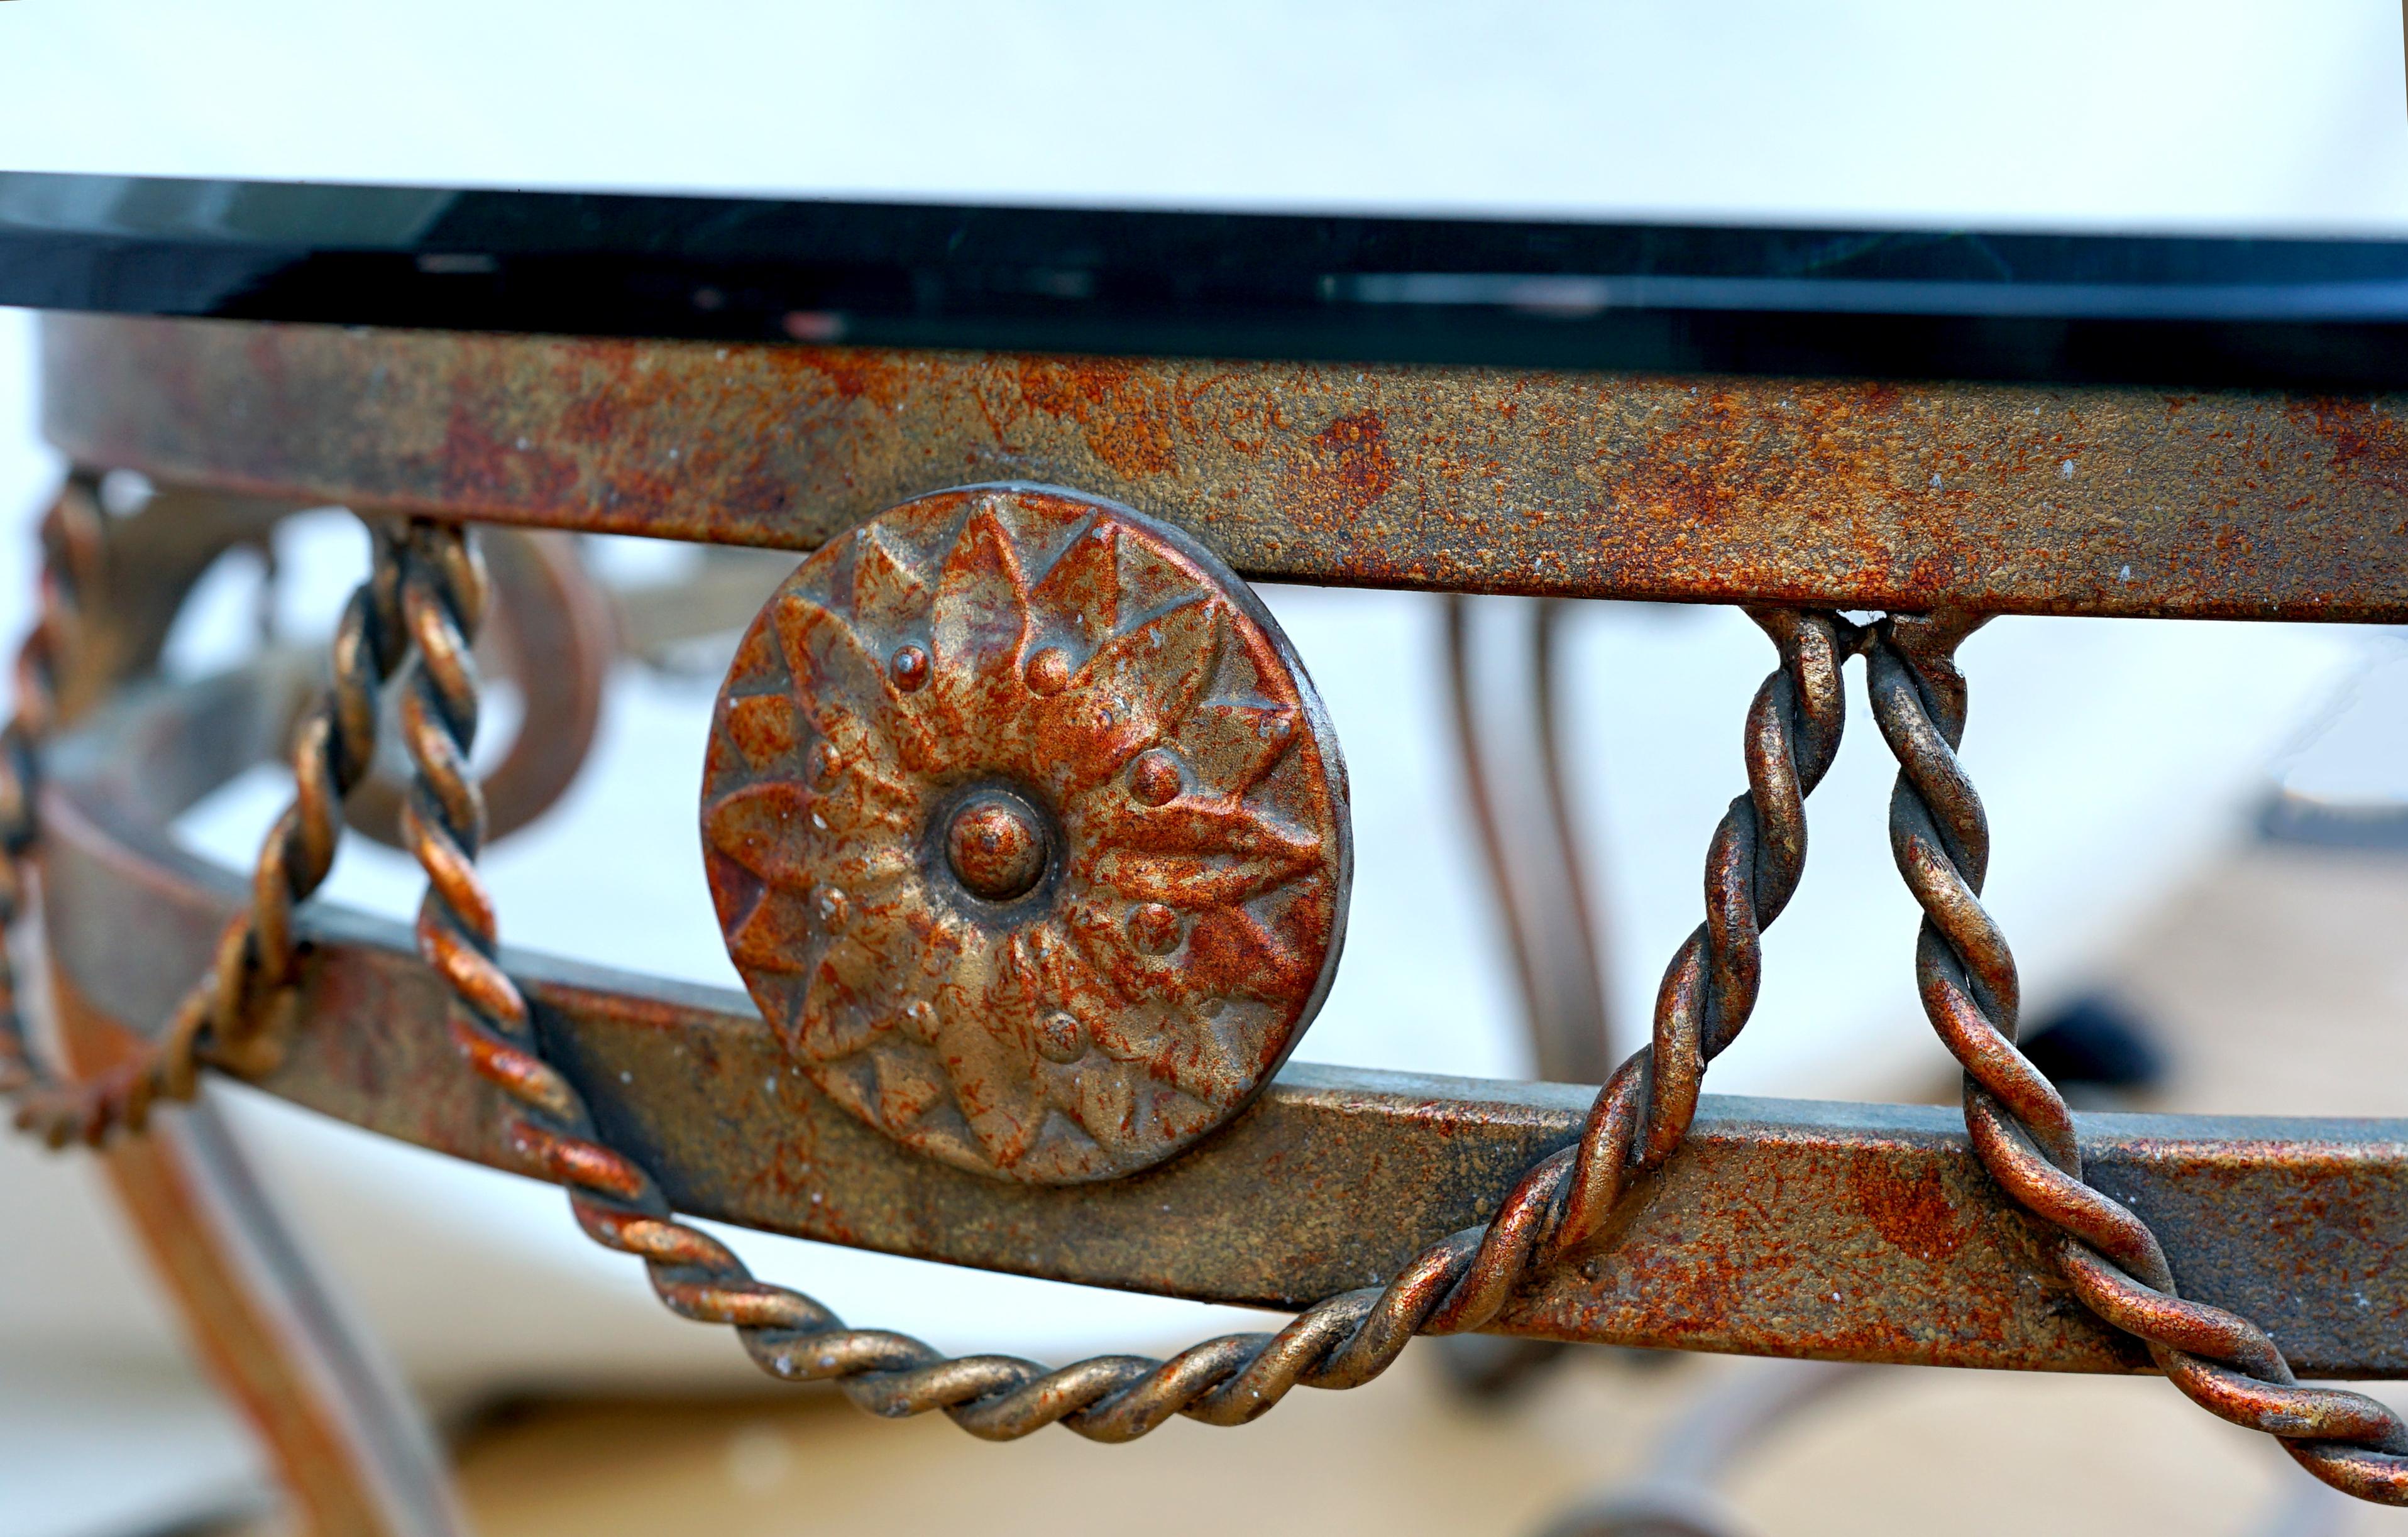 Scrolls and wrought iron swag ropes make this table a standout. The detailing and craftsmanship in iron is attractive. 
OF oval section with beveled glass top, the frame with scrolled and interlocking elements, twisted swag 